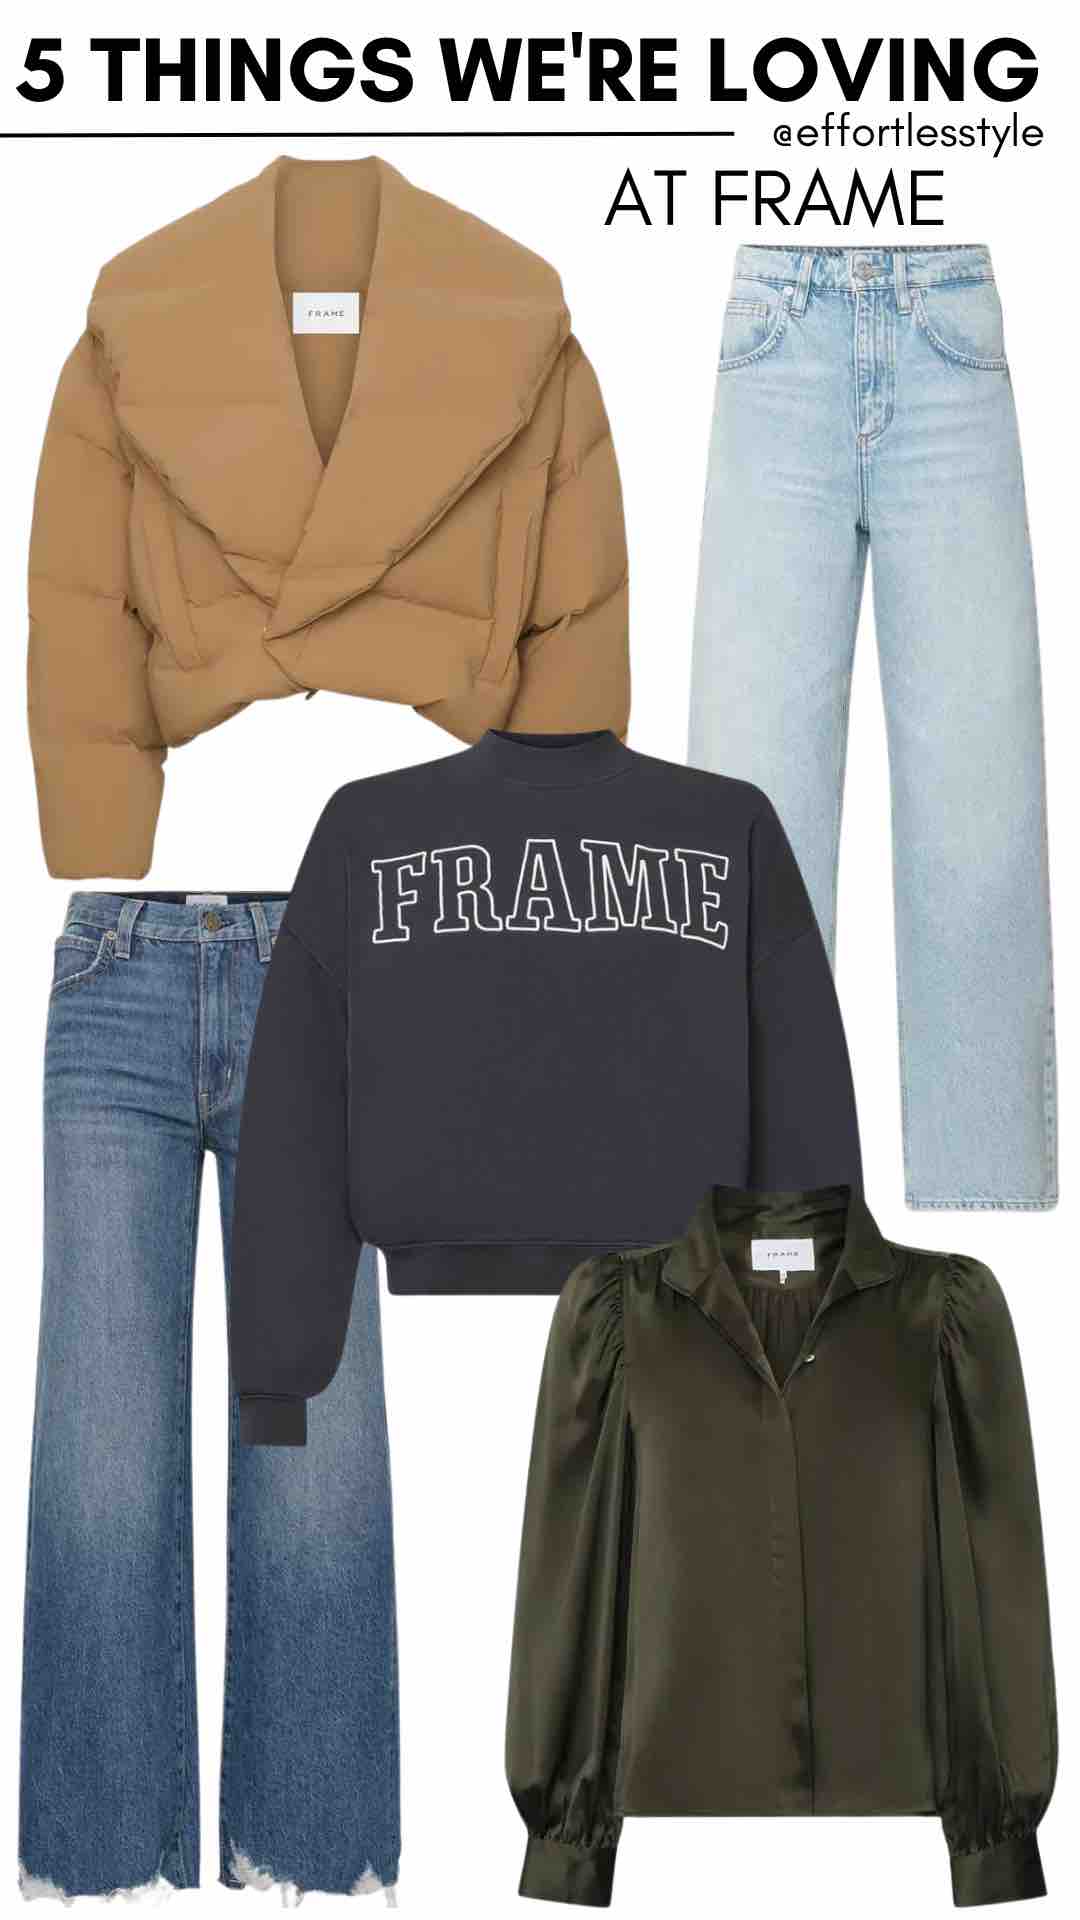 Five Things We Are Loving At Frame nashville stylists share must have pieces for winter versatile winter wardrobe pieces neutral winter wardrobe pieces staple pieces for winter personal stylists share the best winter pieces splurgeworthy winter clothes